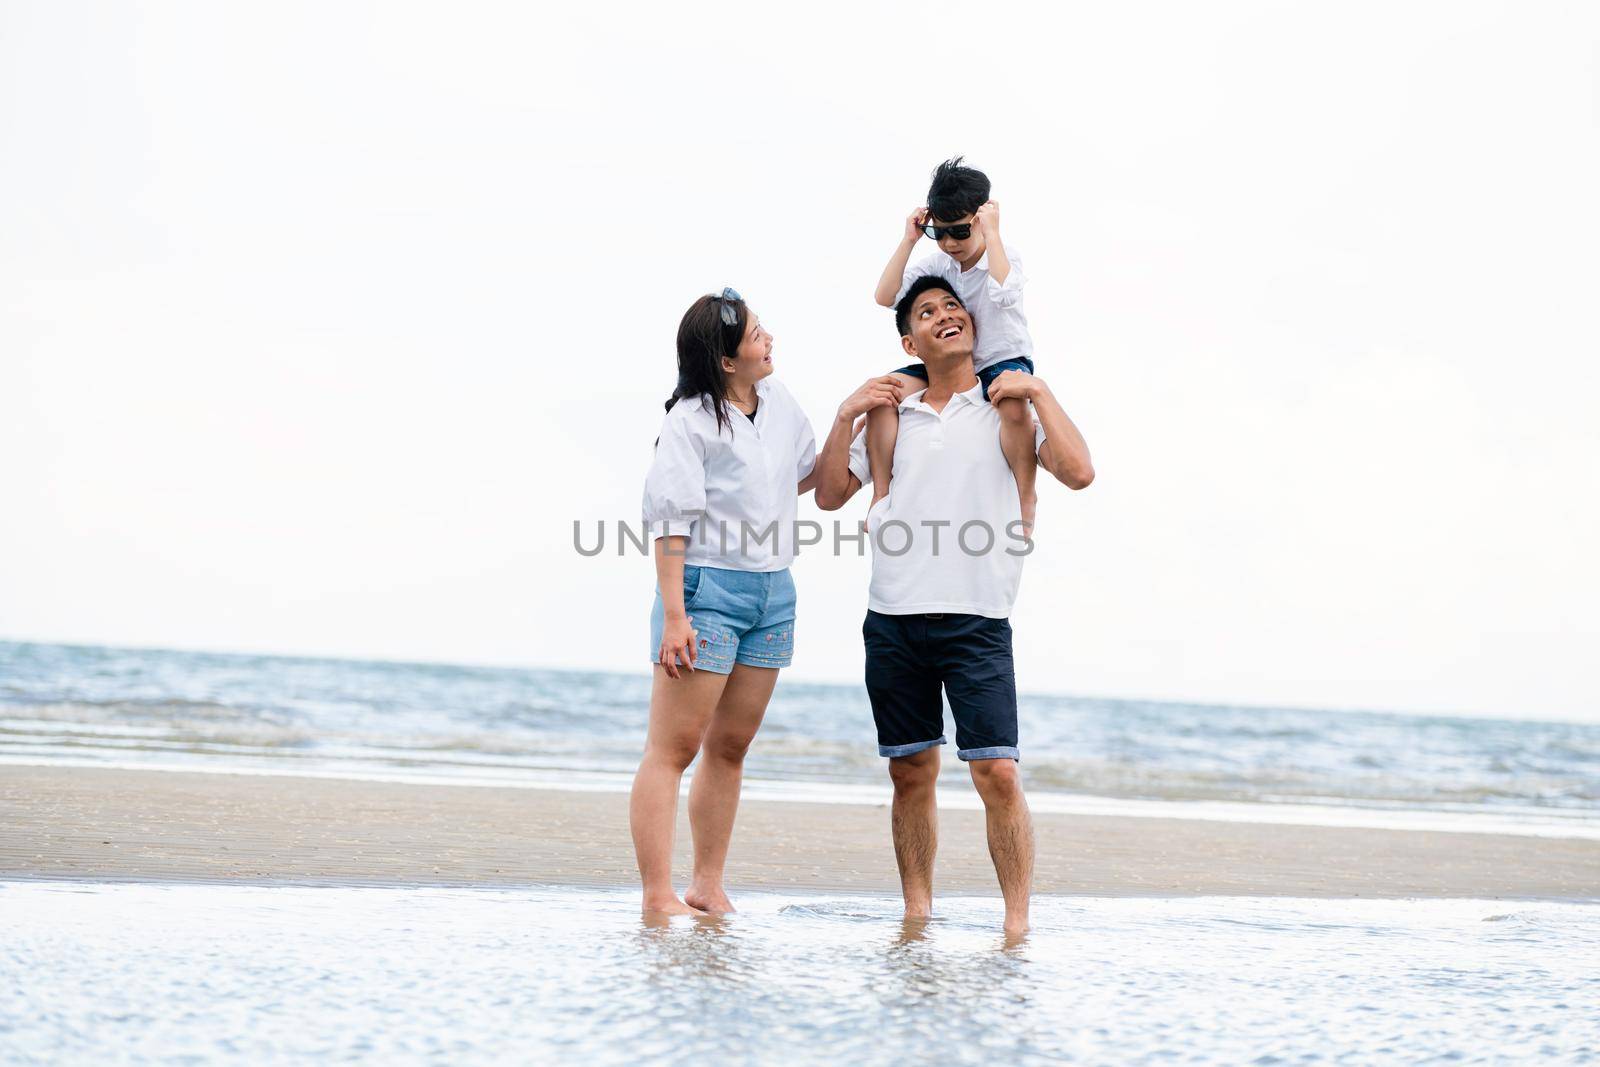 Happy family of father, mother and son goes vacation on a tropical sand beach in summer.